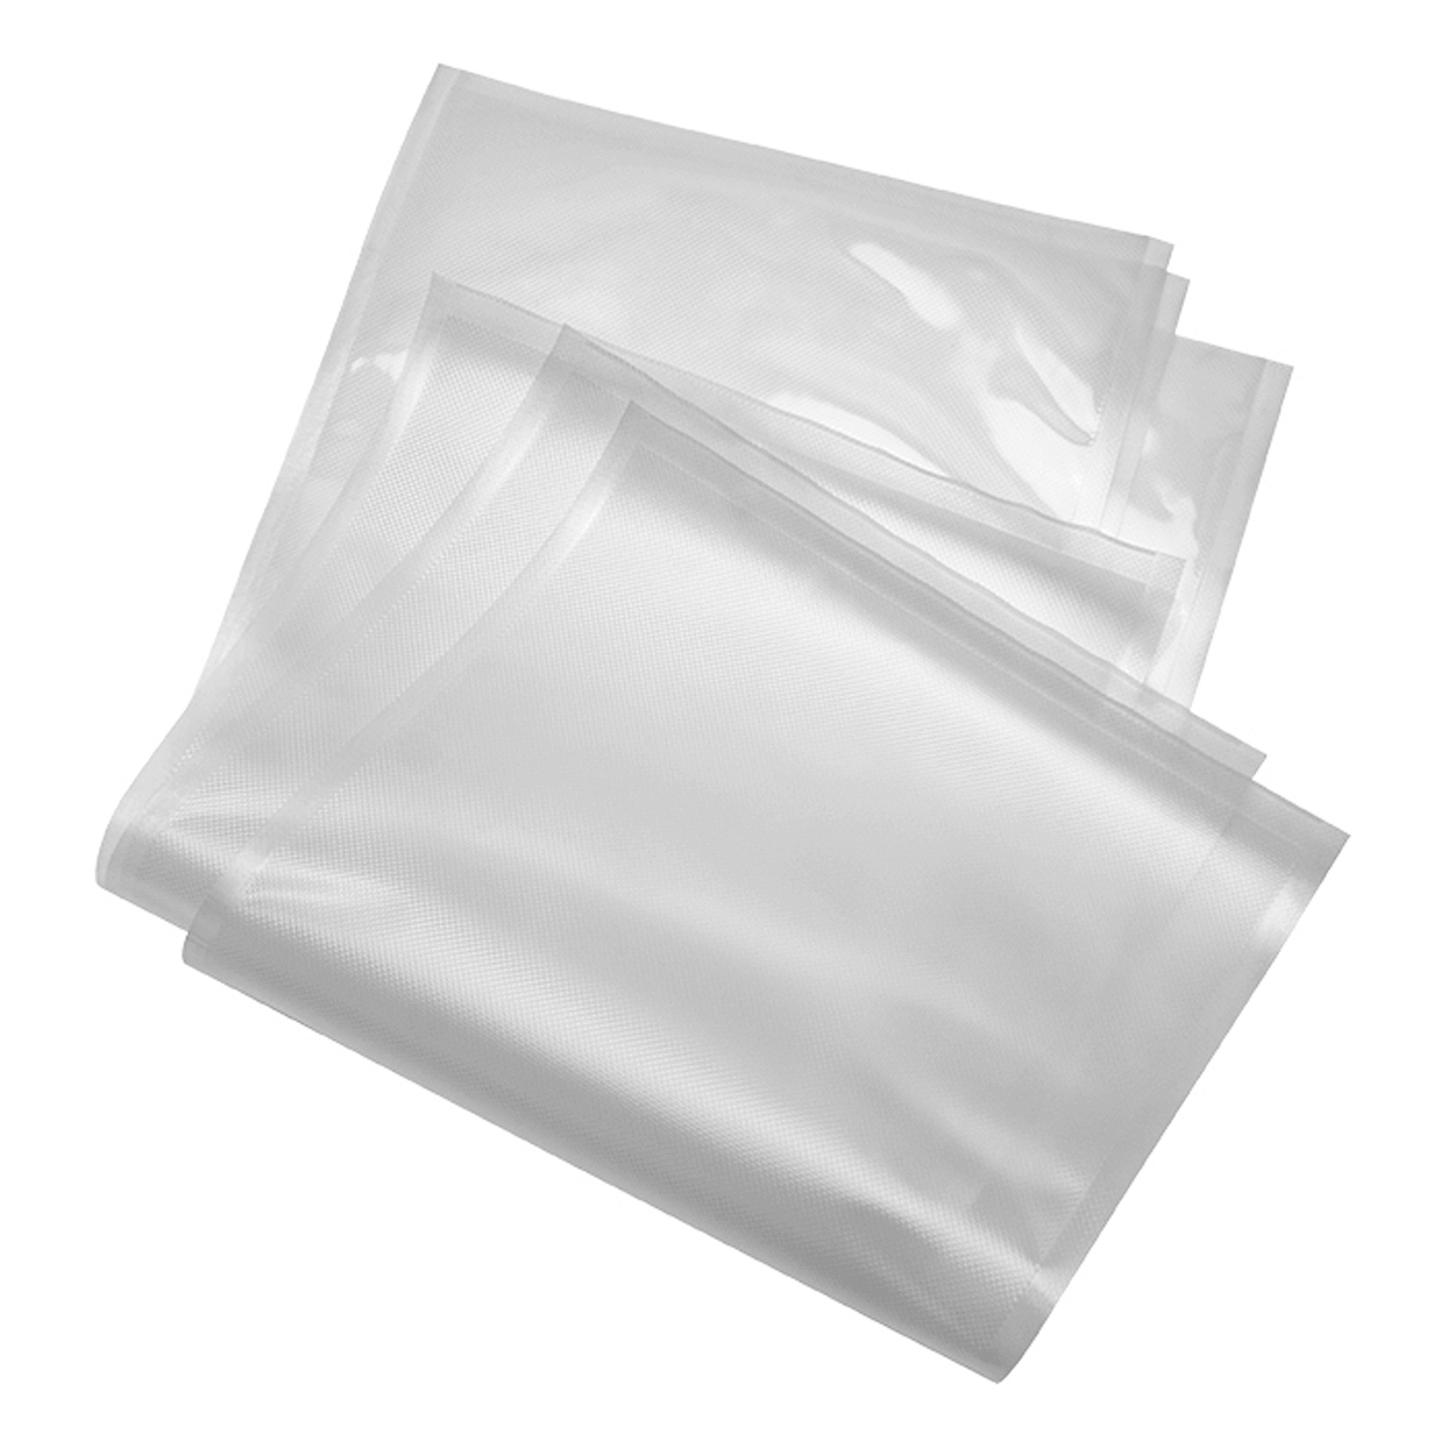 ArmorVac 15"x20" 5mil Precut Vacuum Seal Bags All Clear (50 Pack) 131520CR50 Harvest & Extraction